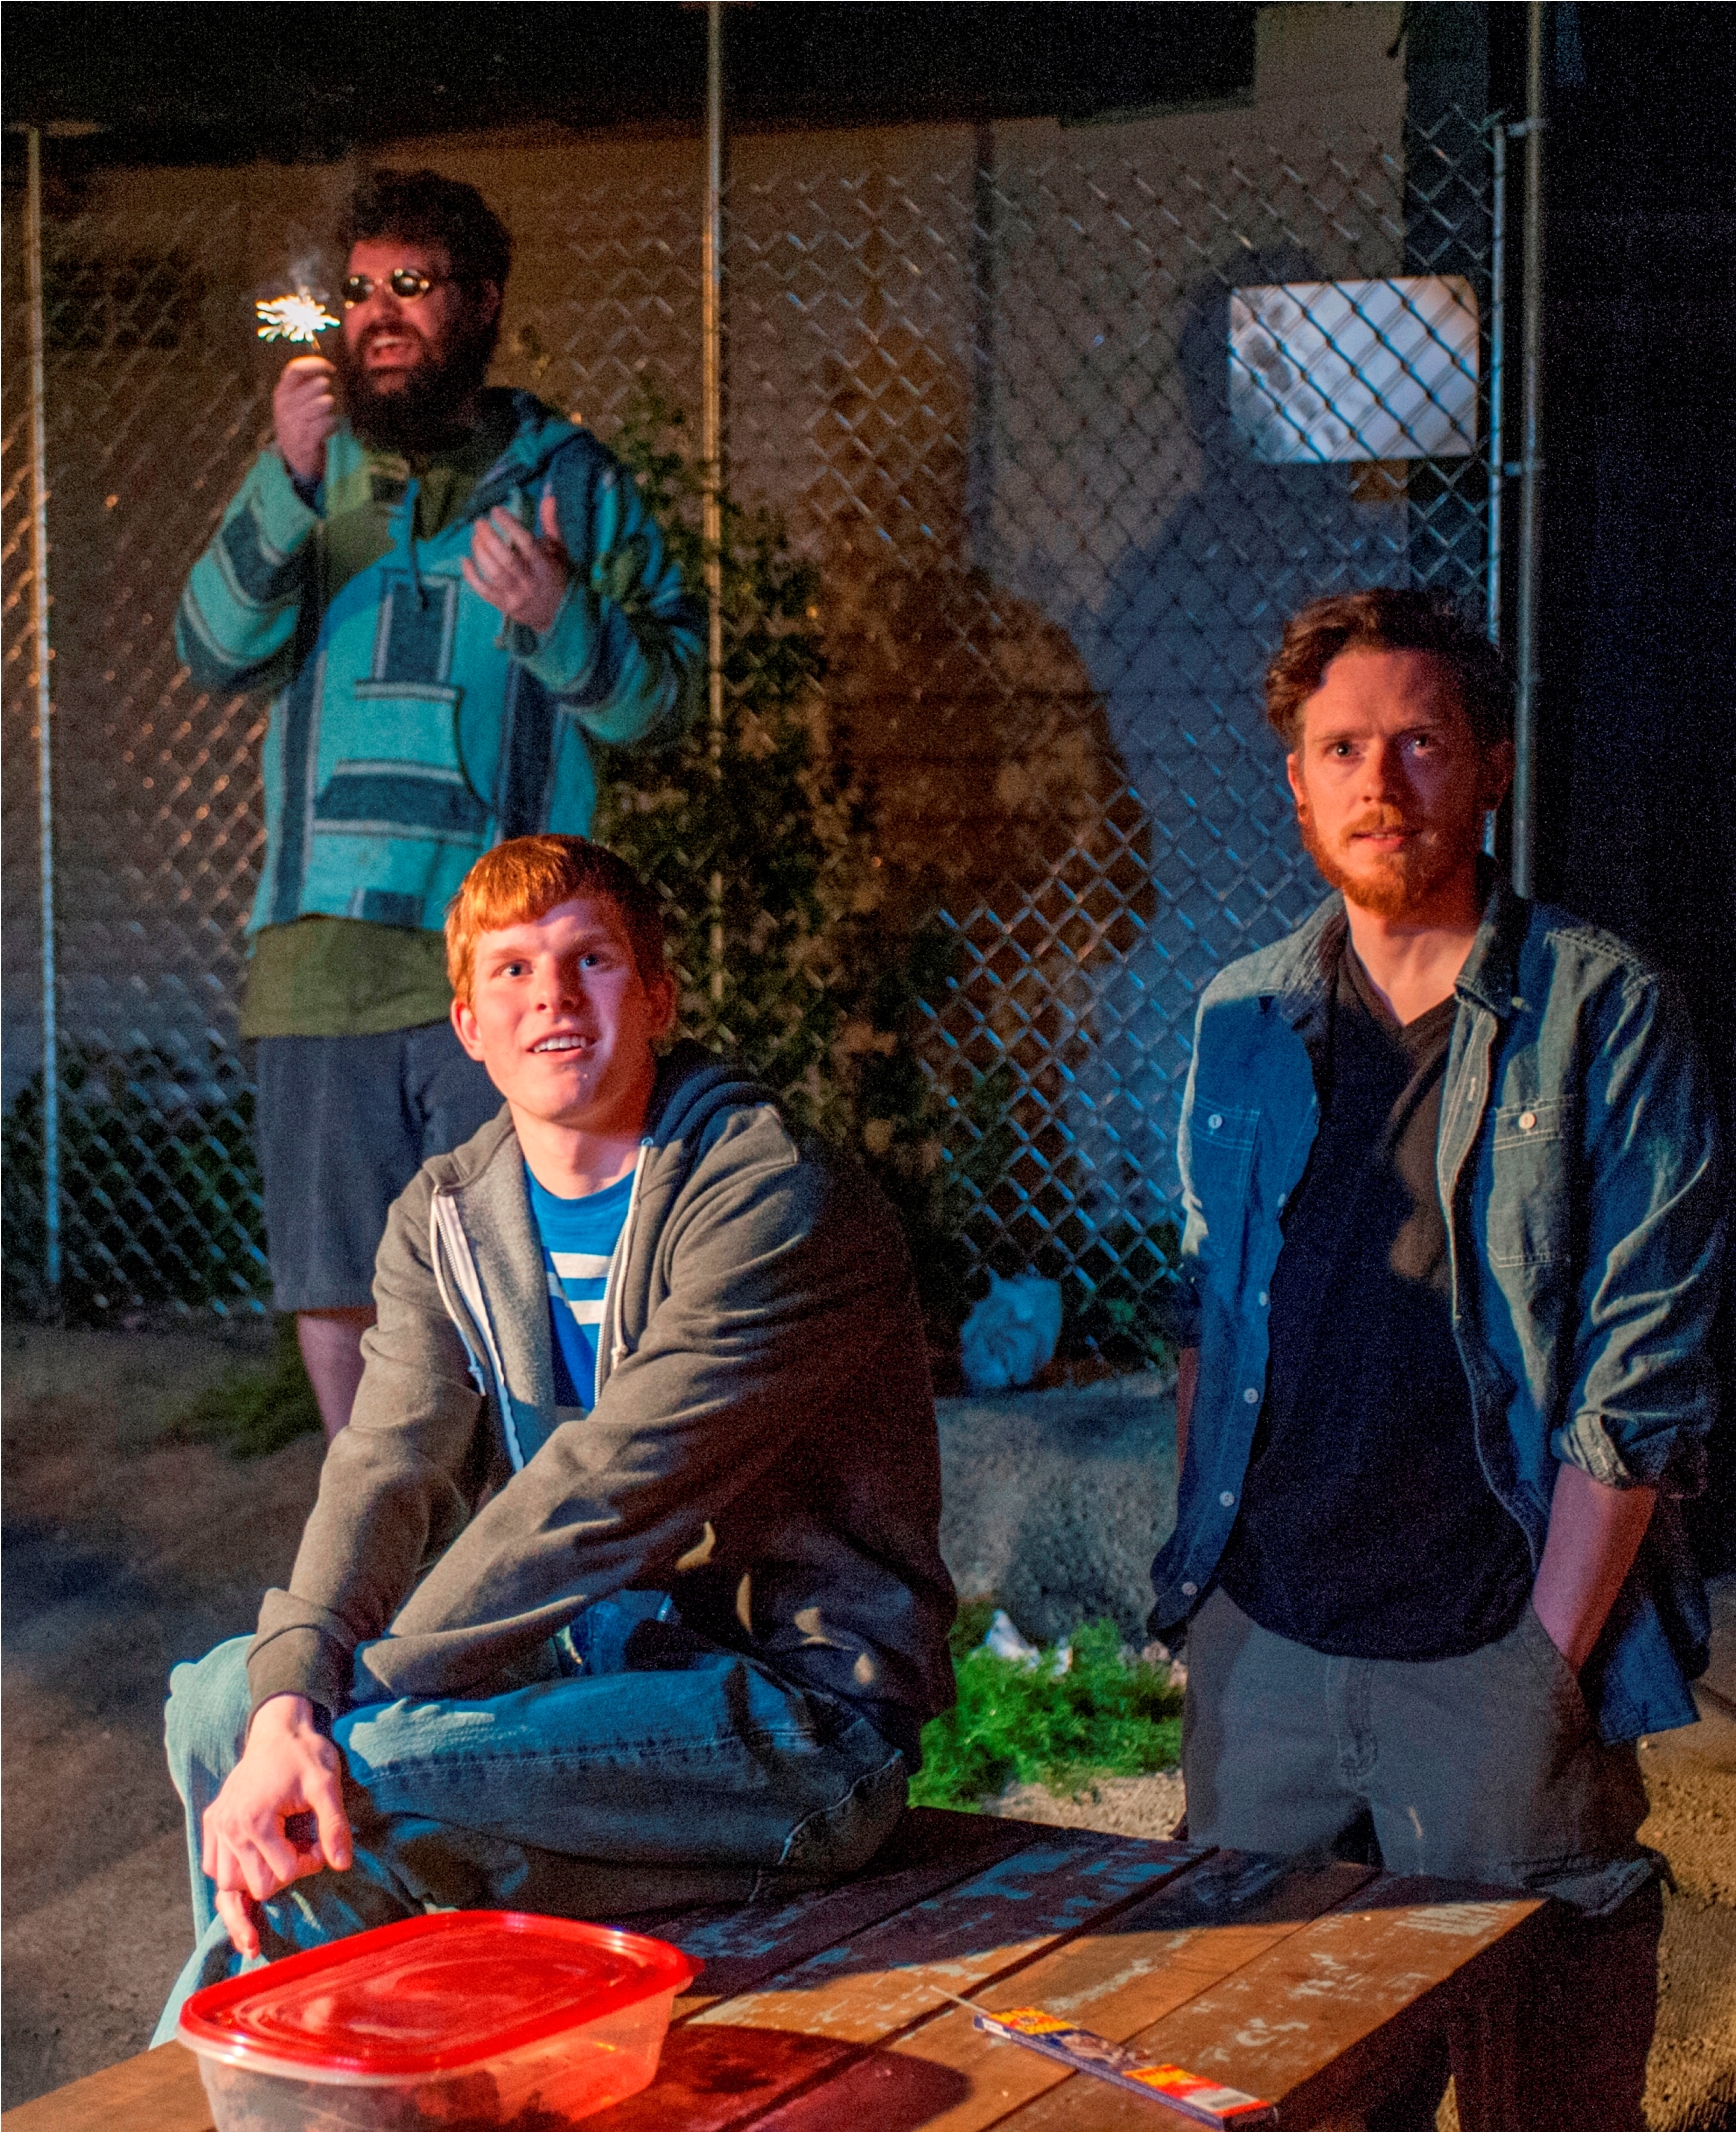 Brad Akin, Michael D. Finley, and Steve Haggard in A Red Orchid Theatre's production of The Aliens (2013), directed by Shade Murray